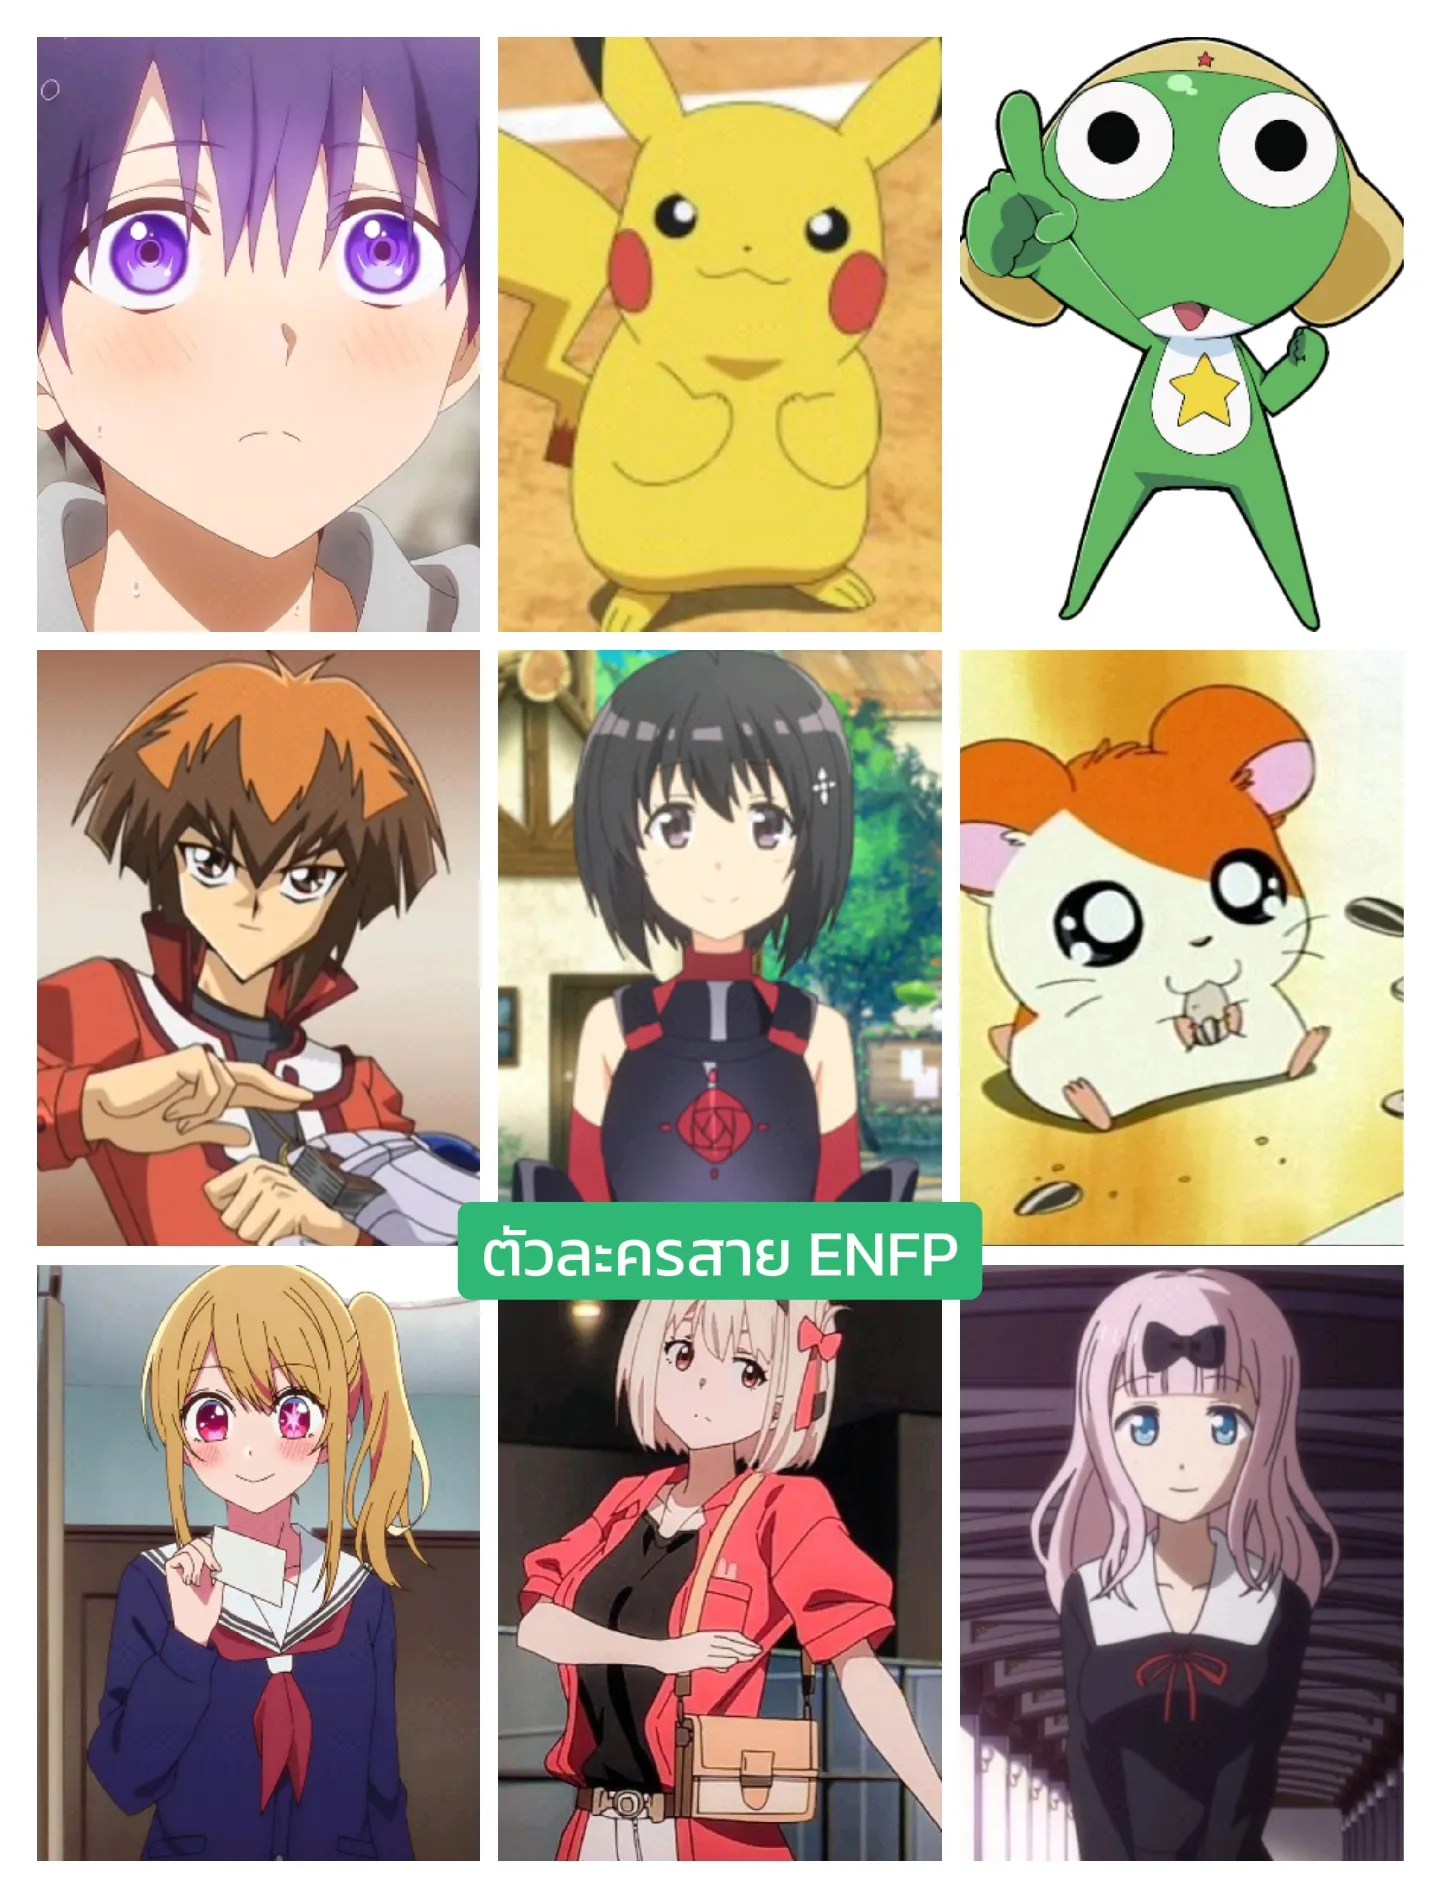 Let's play. Your MBTI personality matches that of an anime character., Gallery posted by Jokesama